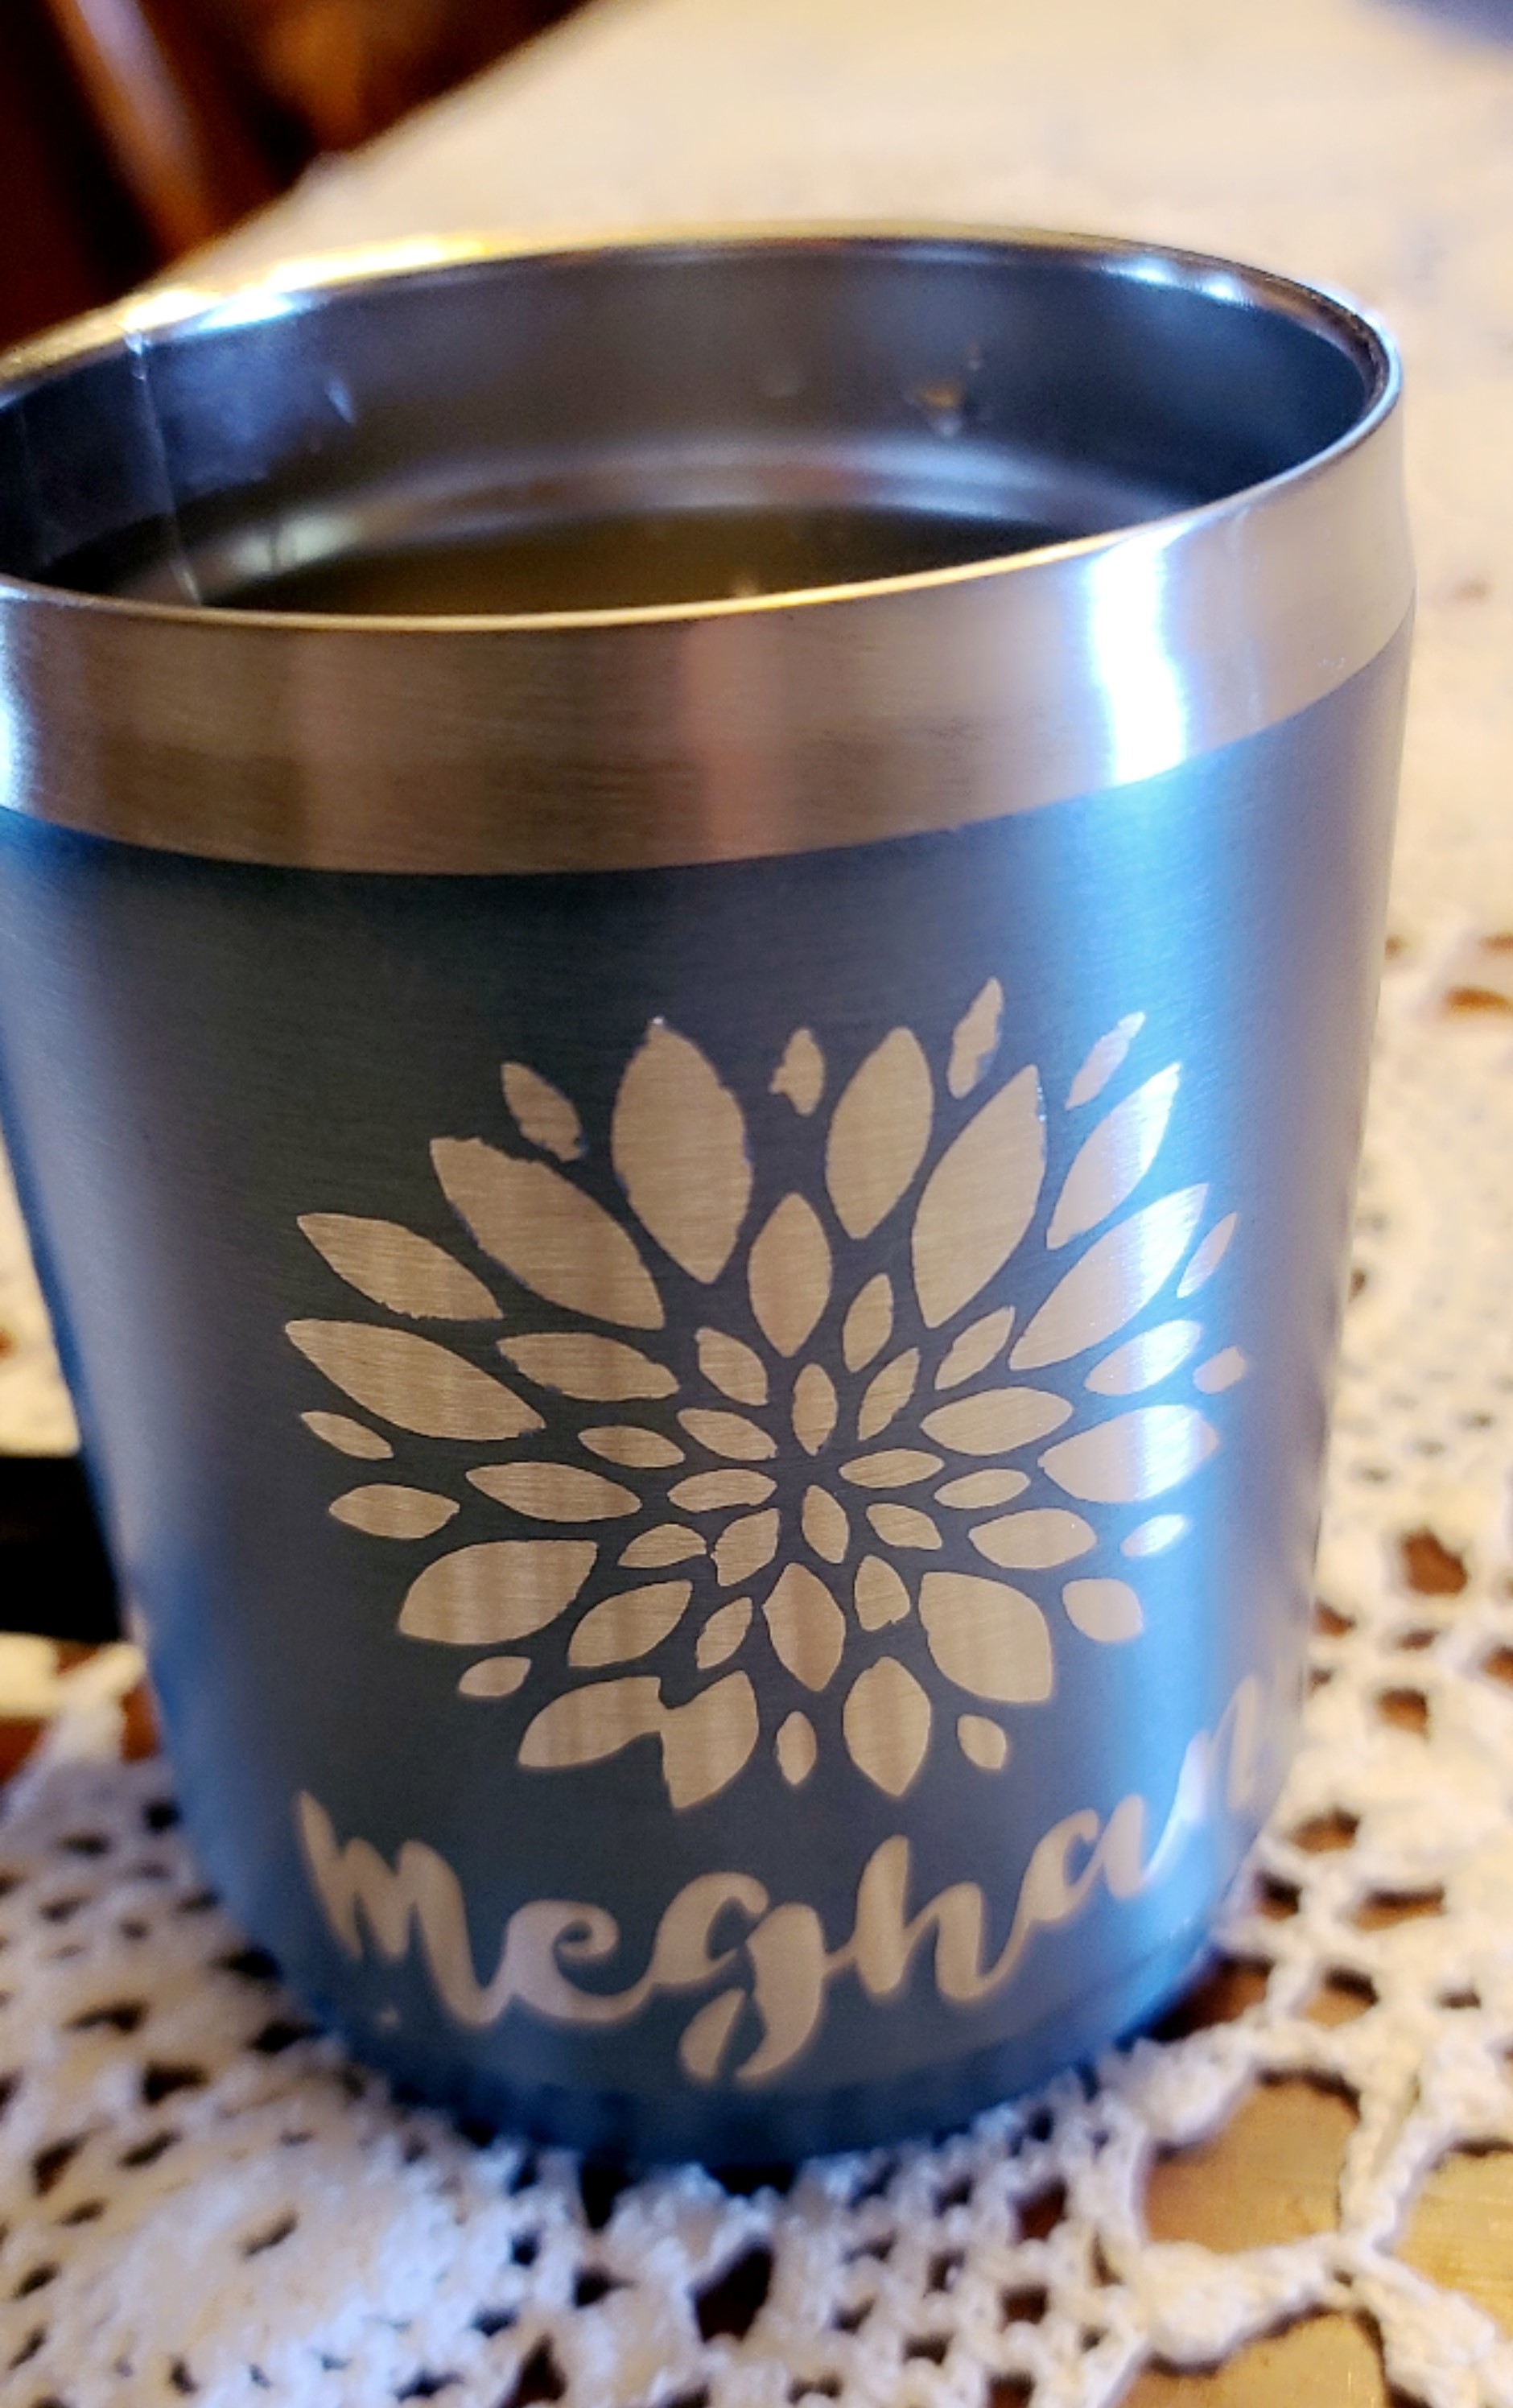 How to Etch Tumblers with Citristrip and Cricut Vinyl